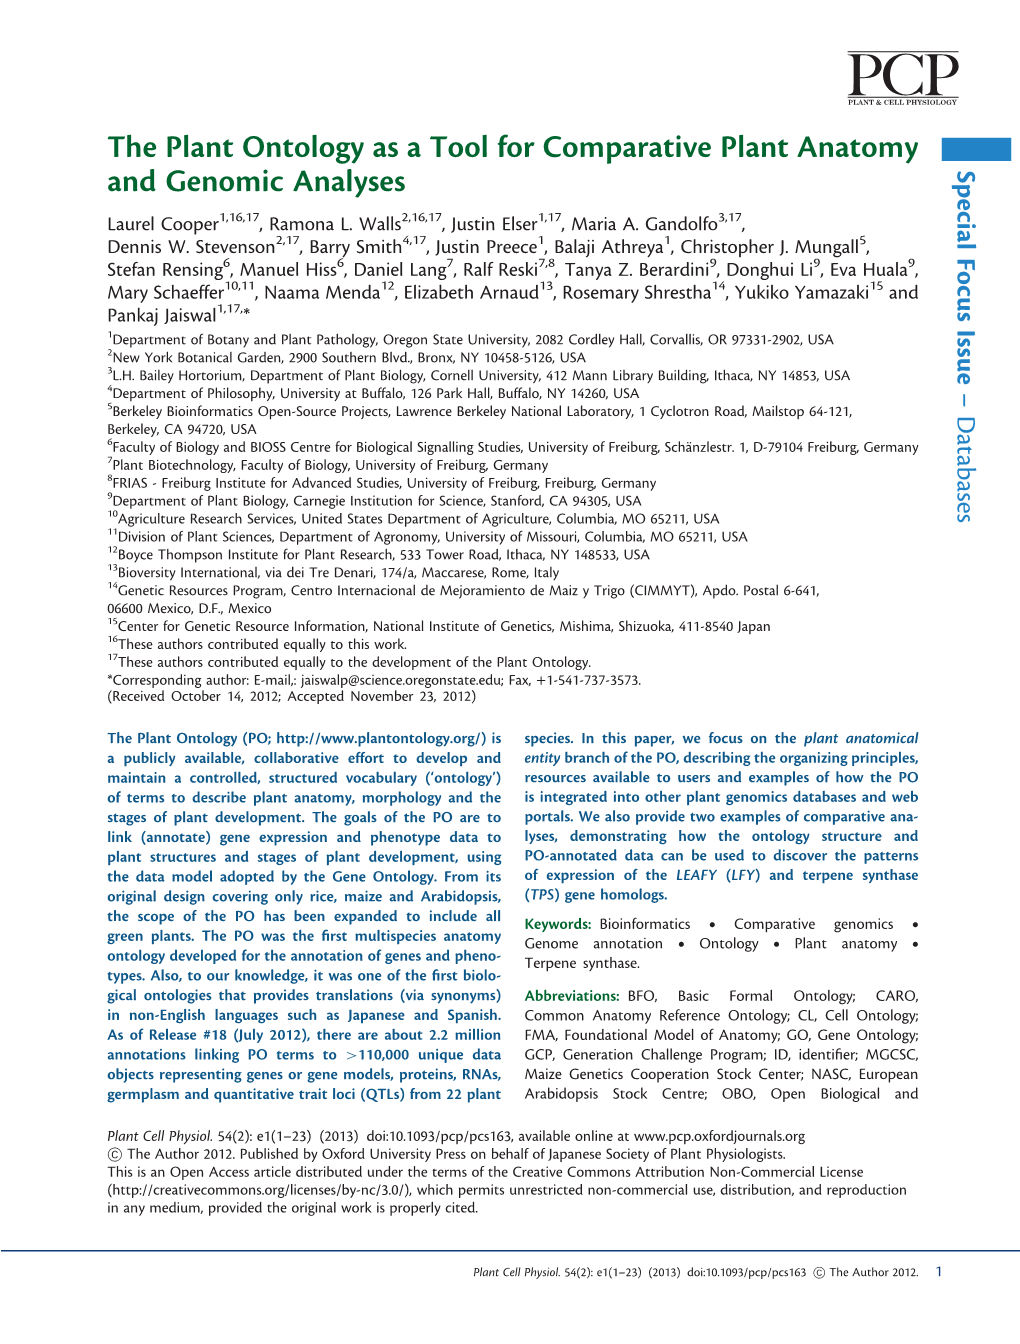 The Plant Ontology As a Tool for Comparative Plant Anatomy and Genomic Analyses Issue Focus Special Laurel Cooper1,16,17, Ramona L